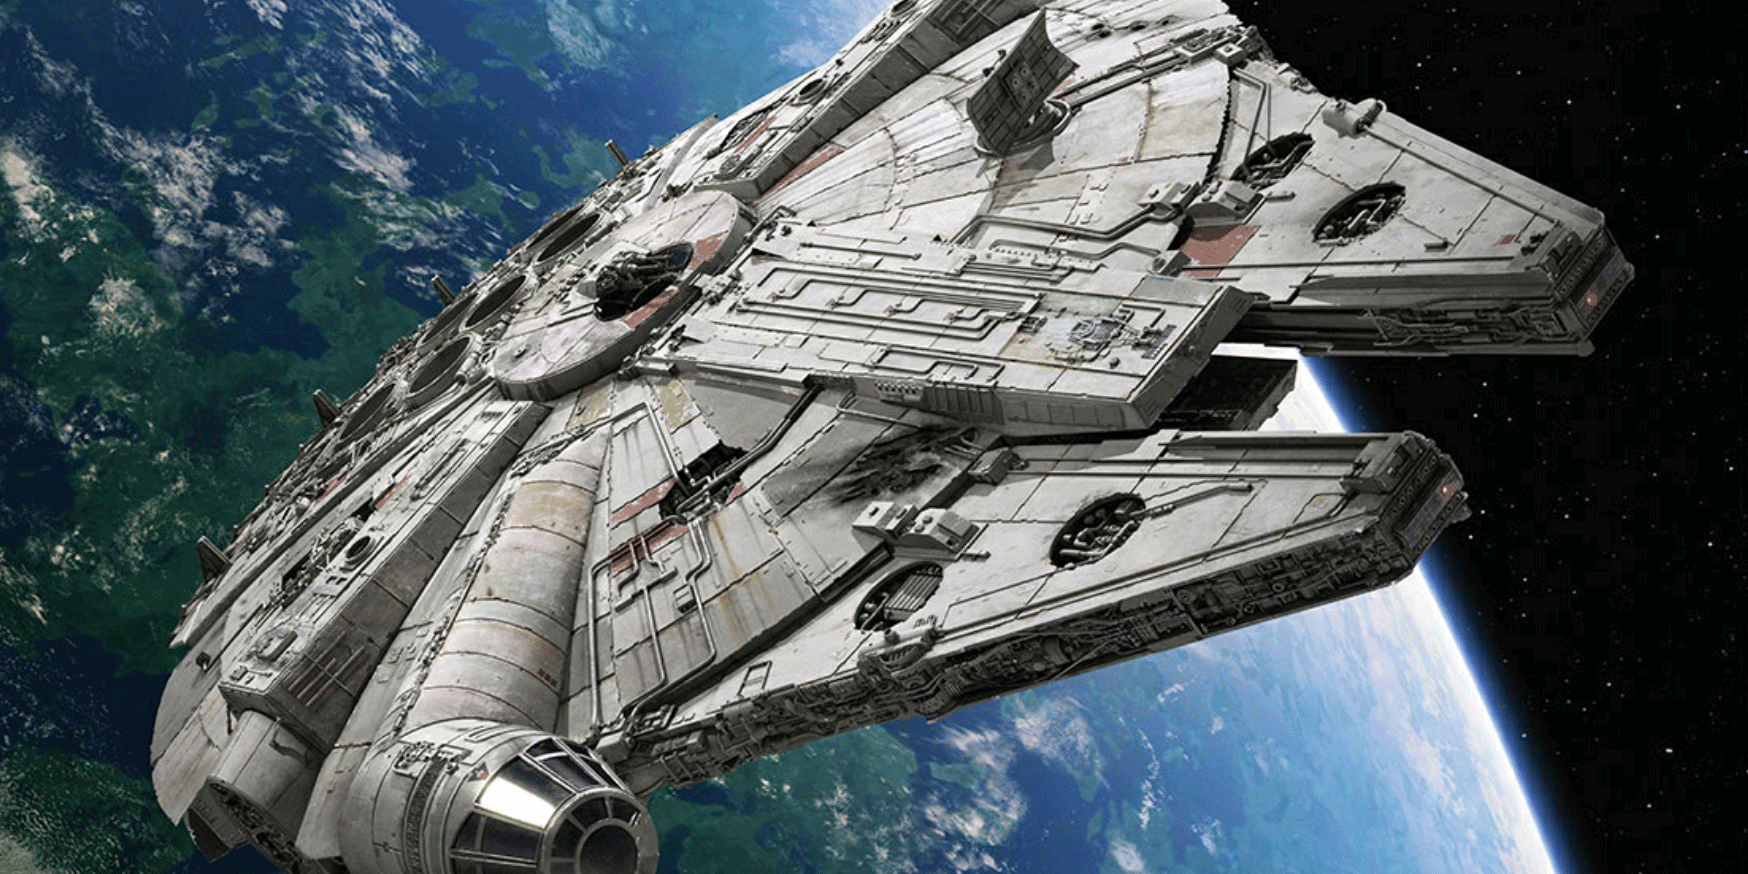 Disney tried to hide the Millennium Falcon with shipping containers — but  it's on Google Maps, The Independent